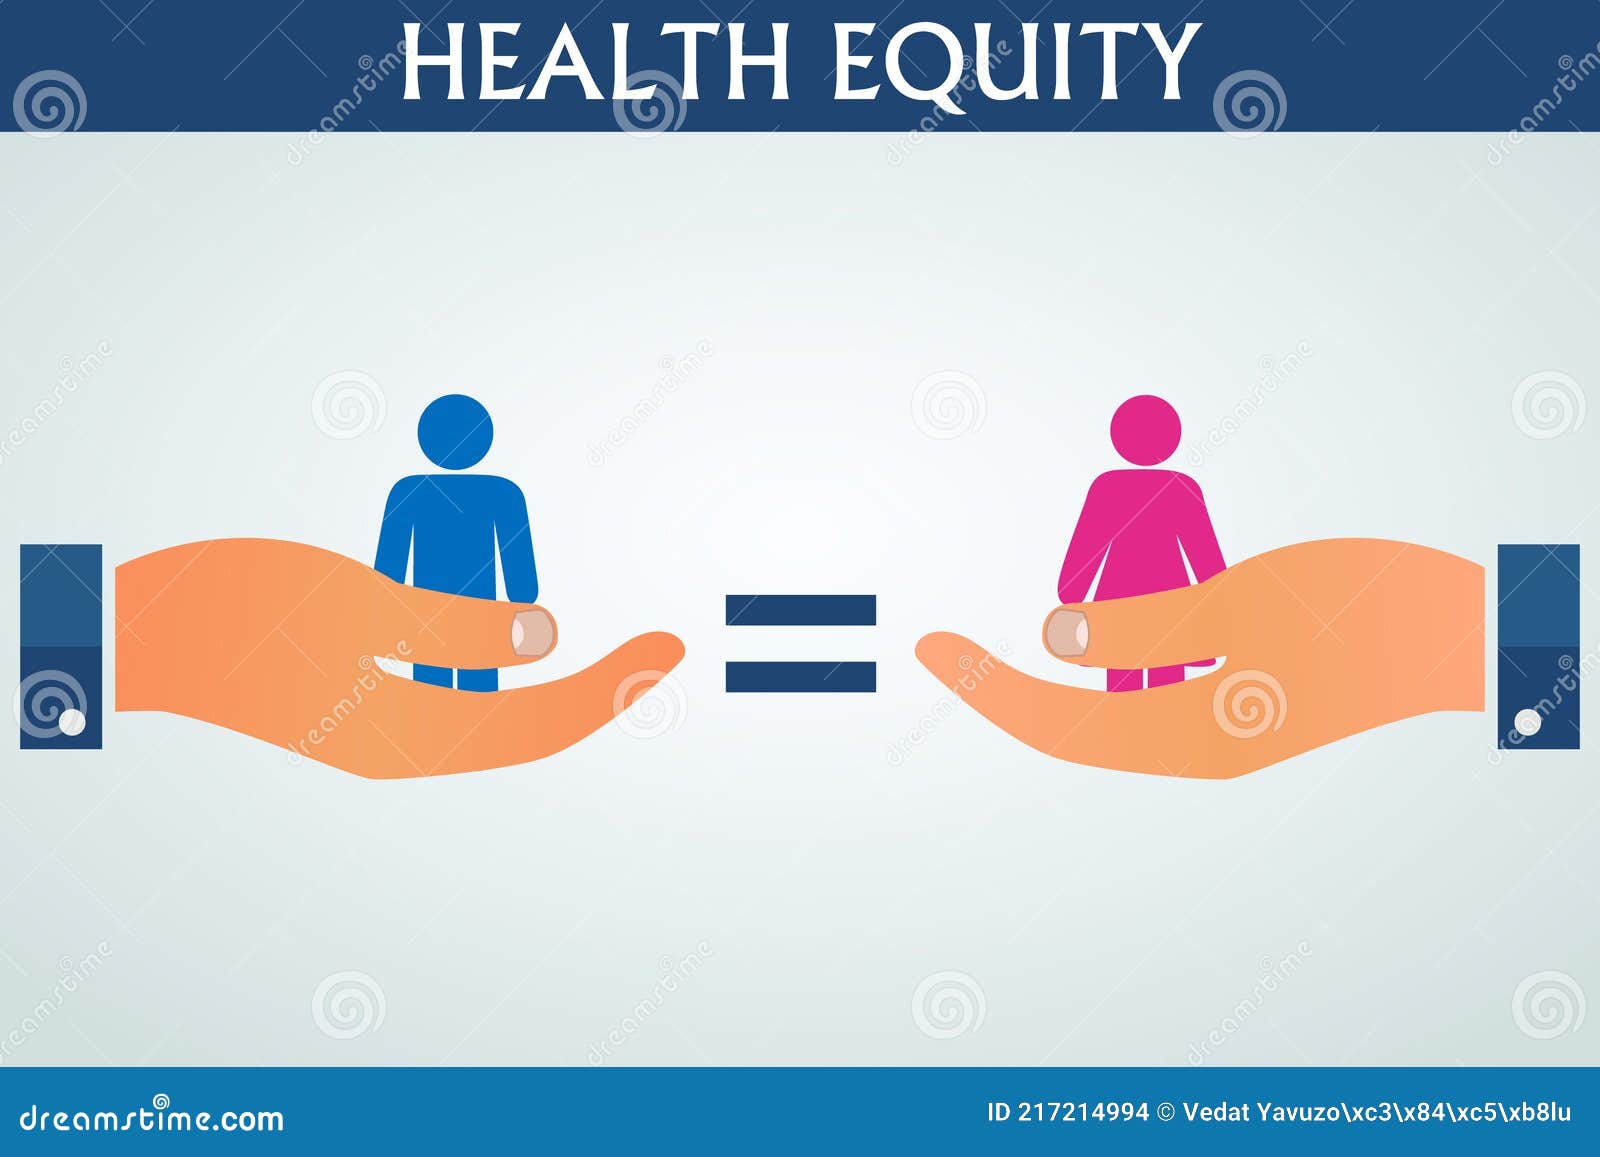 Health Equality Illustration Vector Flat Banner. Healthcare, Fairness, and Equity Concept. Stock Vector - of blue, flat: 217214994